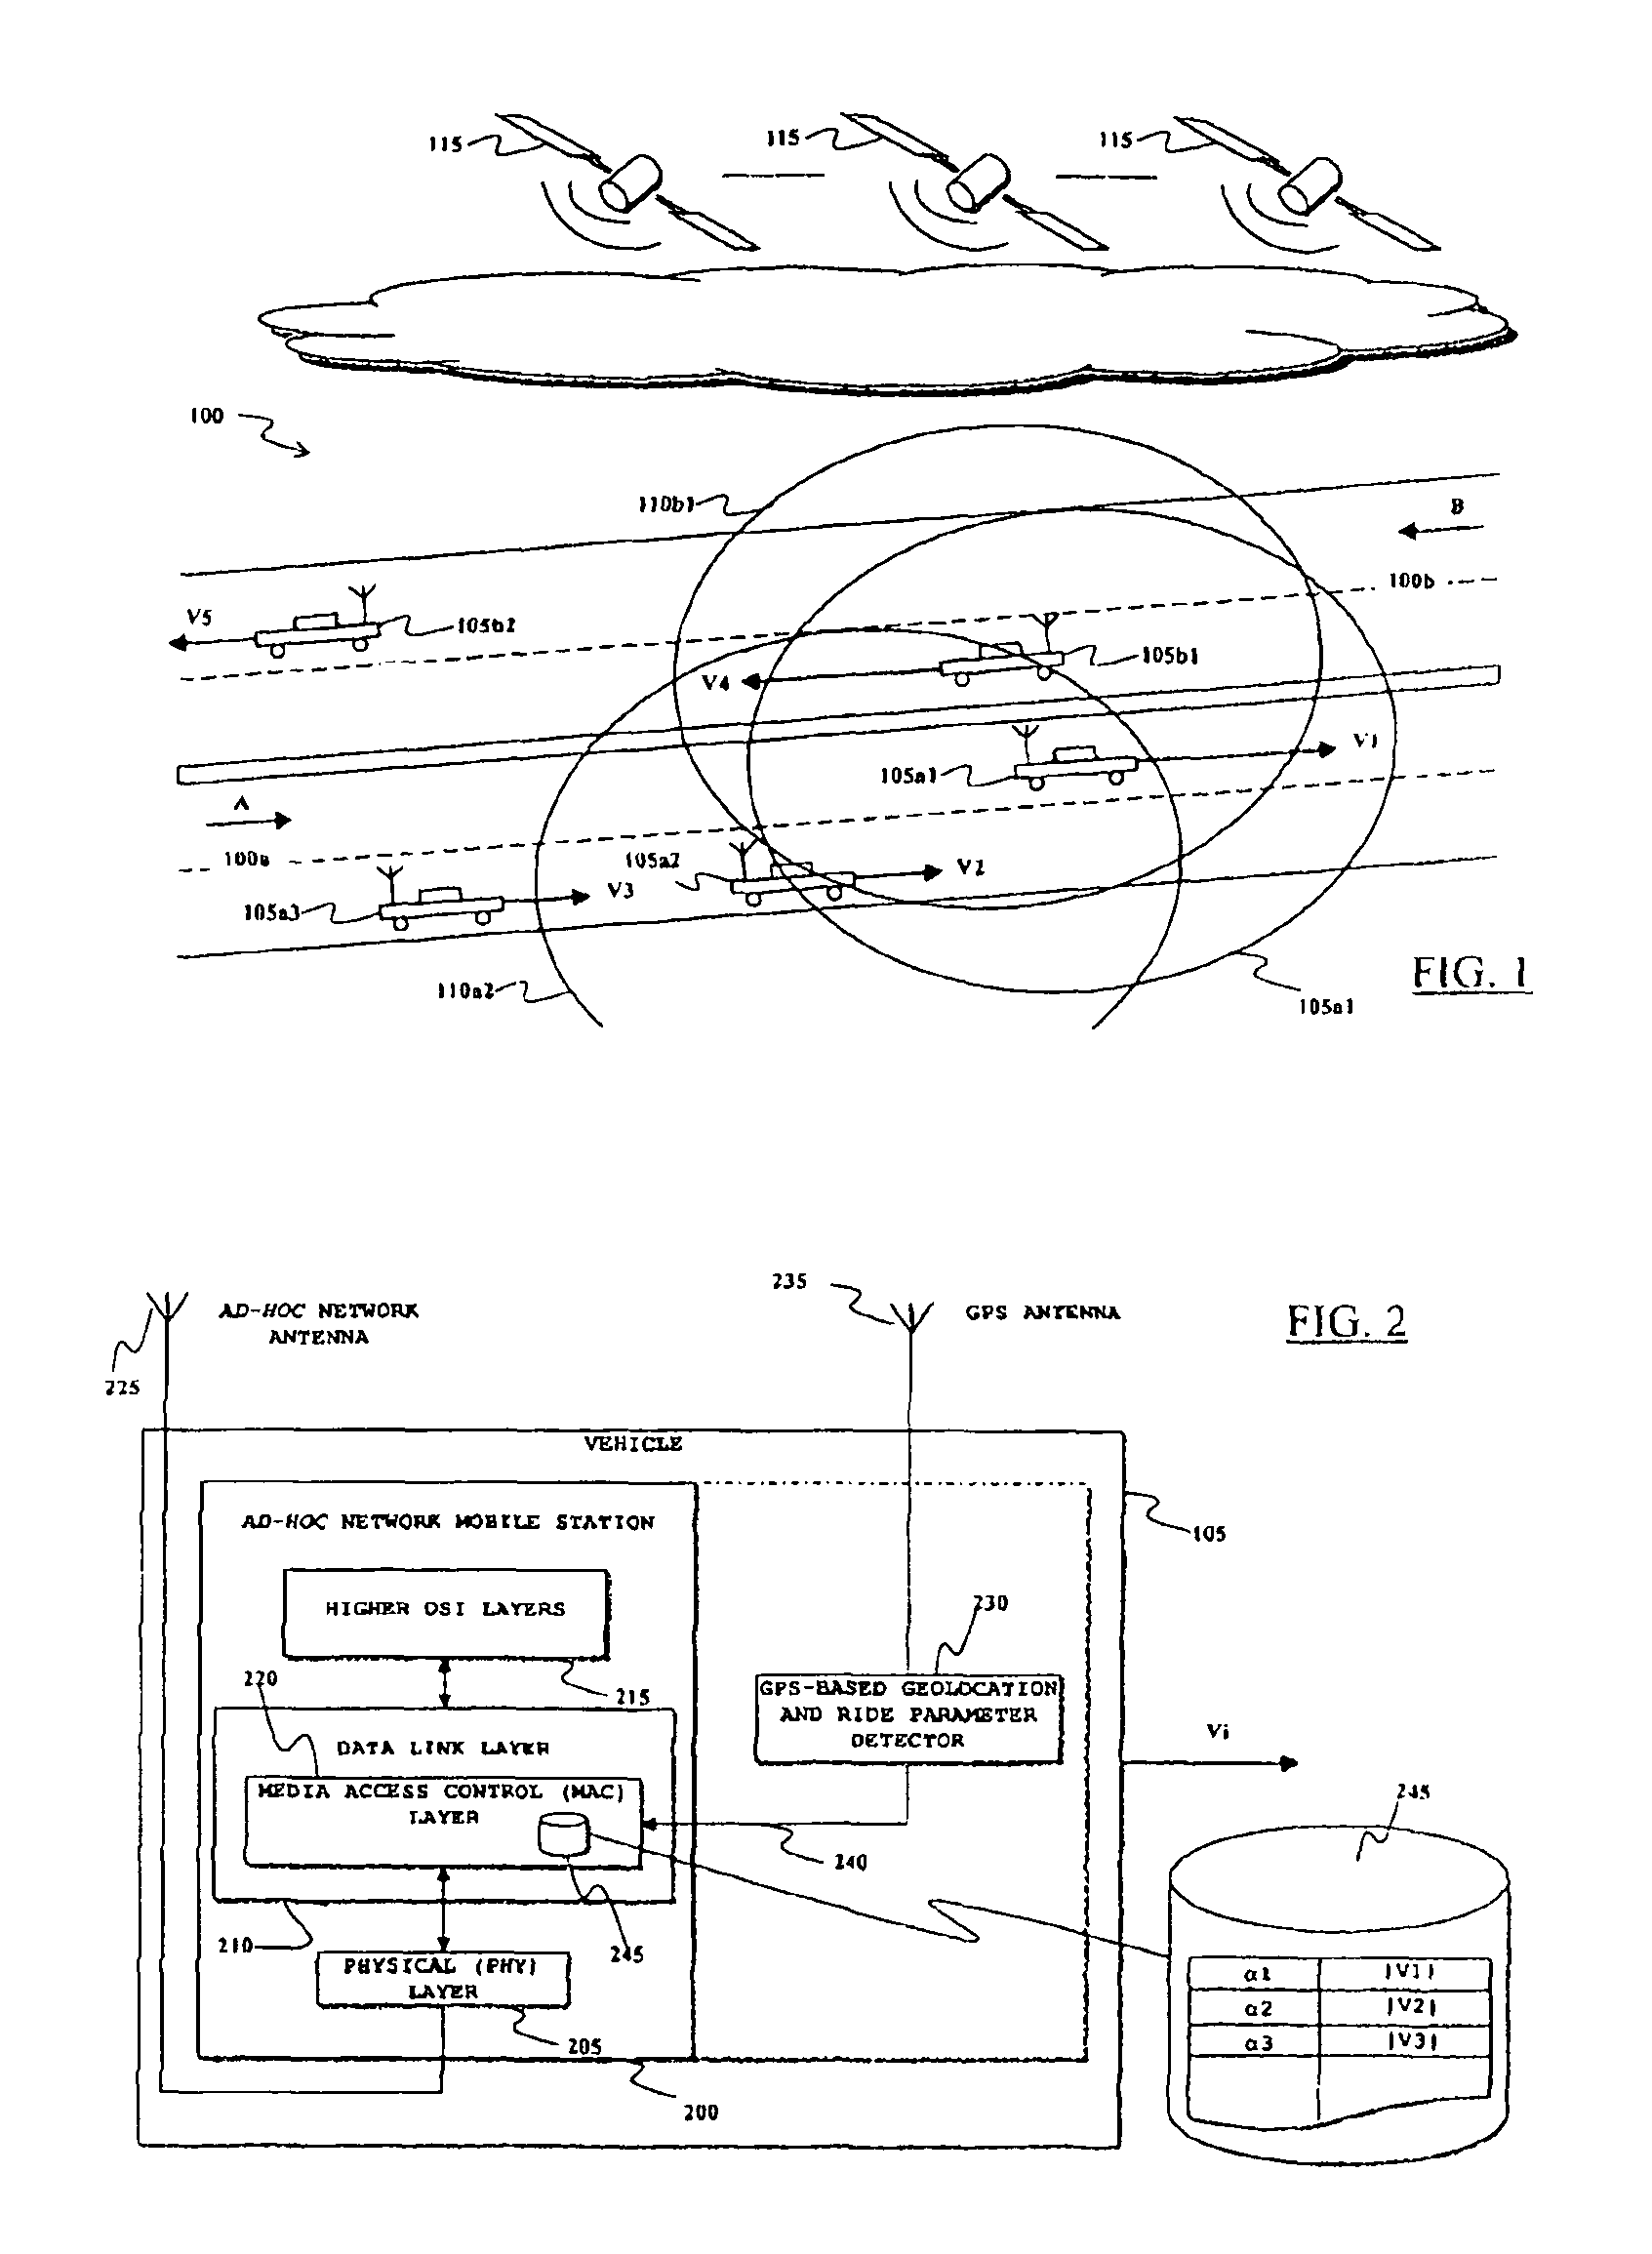 Controlling access to a shared communication medium of a mobile <i>ad-hoc </i>network